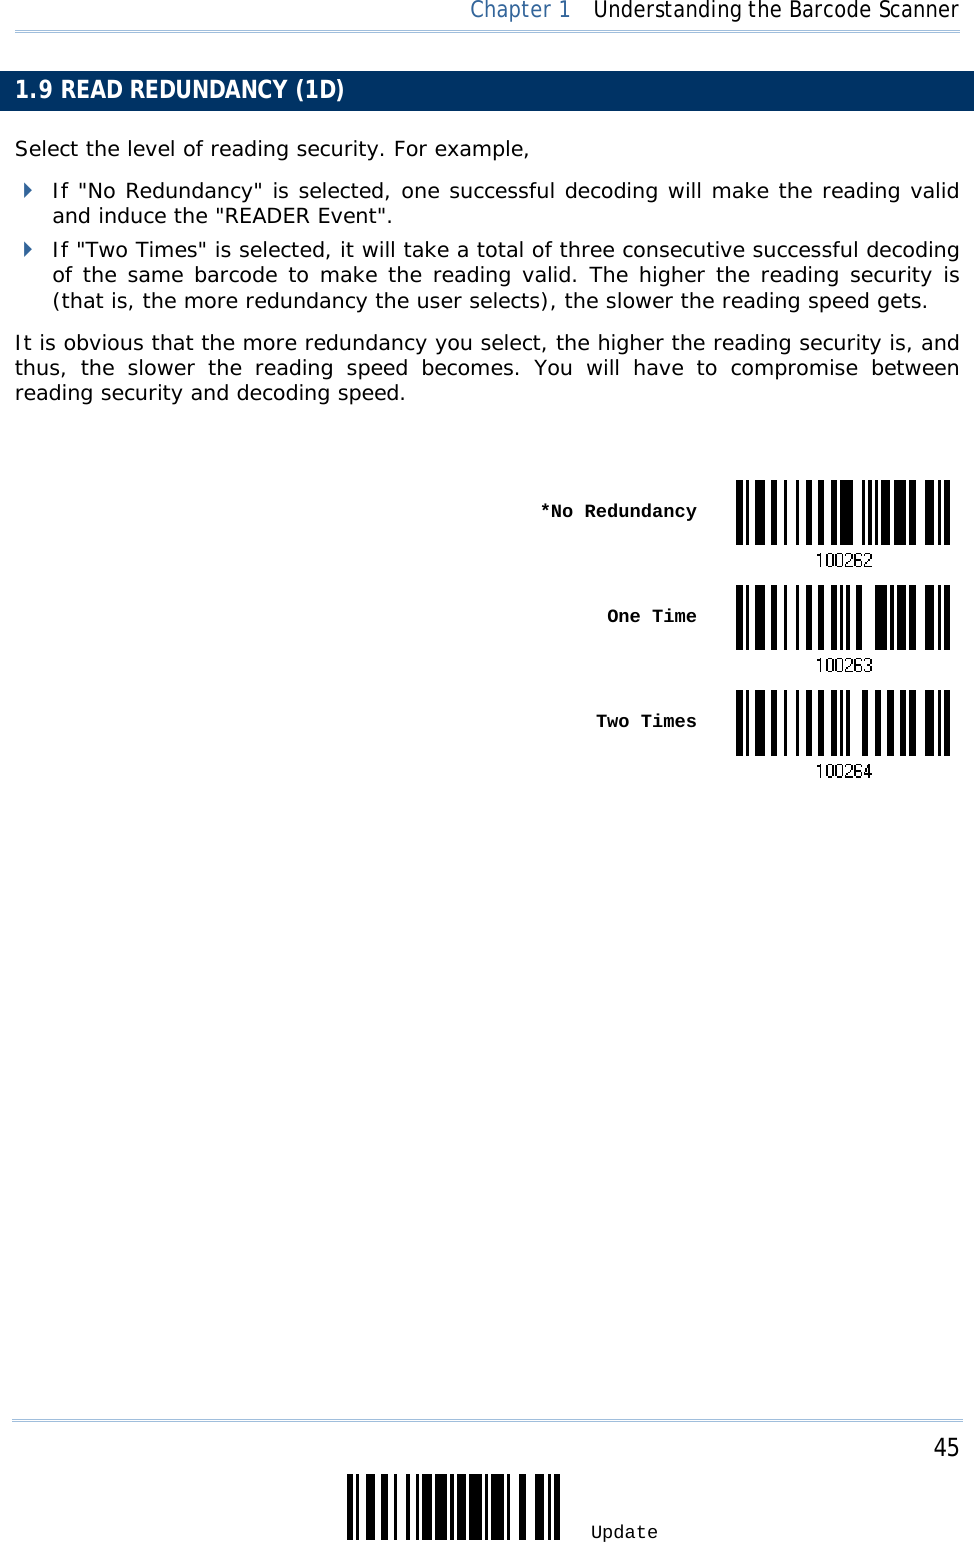     45 Update  Chapter 1  Understanding the Barcode Scanner 1.9 READ REDUNDANCY (1D) Select the level of reading security. For example,  If &quot;No Redundancy&quot; is selected, one successful decoding will make the reading valid and induce the &quot;READER Event&quot;.  If &quot;Two Times&quot; is selected, it will take a total of three consecutive successful decoding of the same barcode to make the reading valid. The higher the reading security is (that is, the more redundancy the user selects), the slower the reading speed gets.  It is obvious that the more redundancy you select, the higher the reading security is, and thus, the slower the reading speed becomes. You will have to compromise between reading security and decoding speed.   *No Redundancy One Time Two Times                          